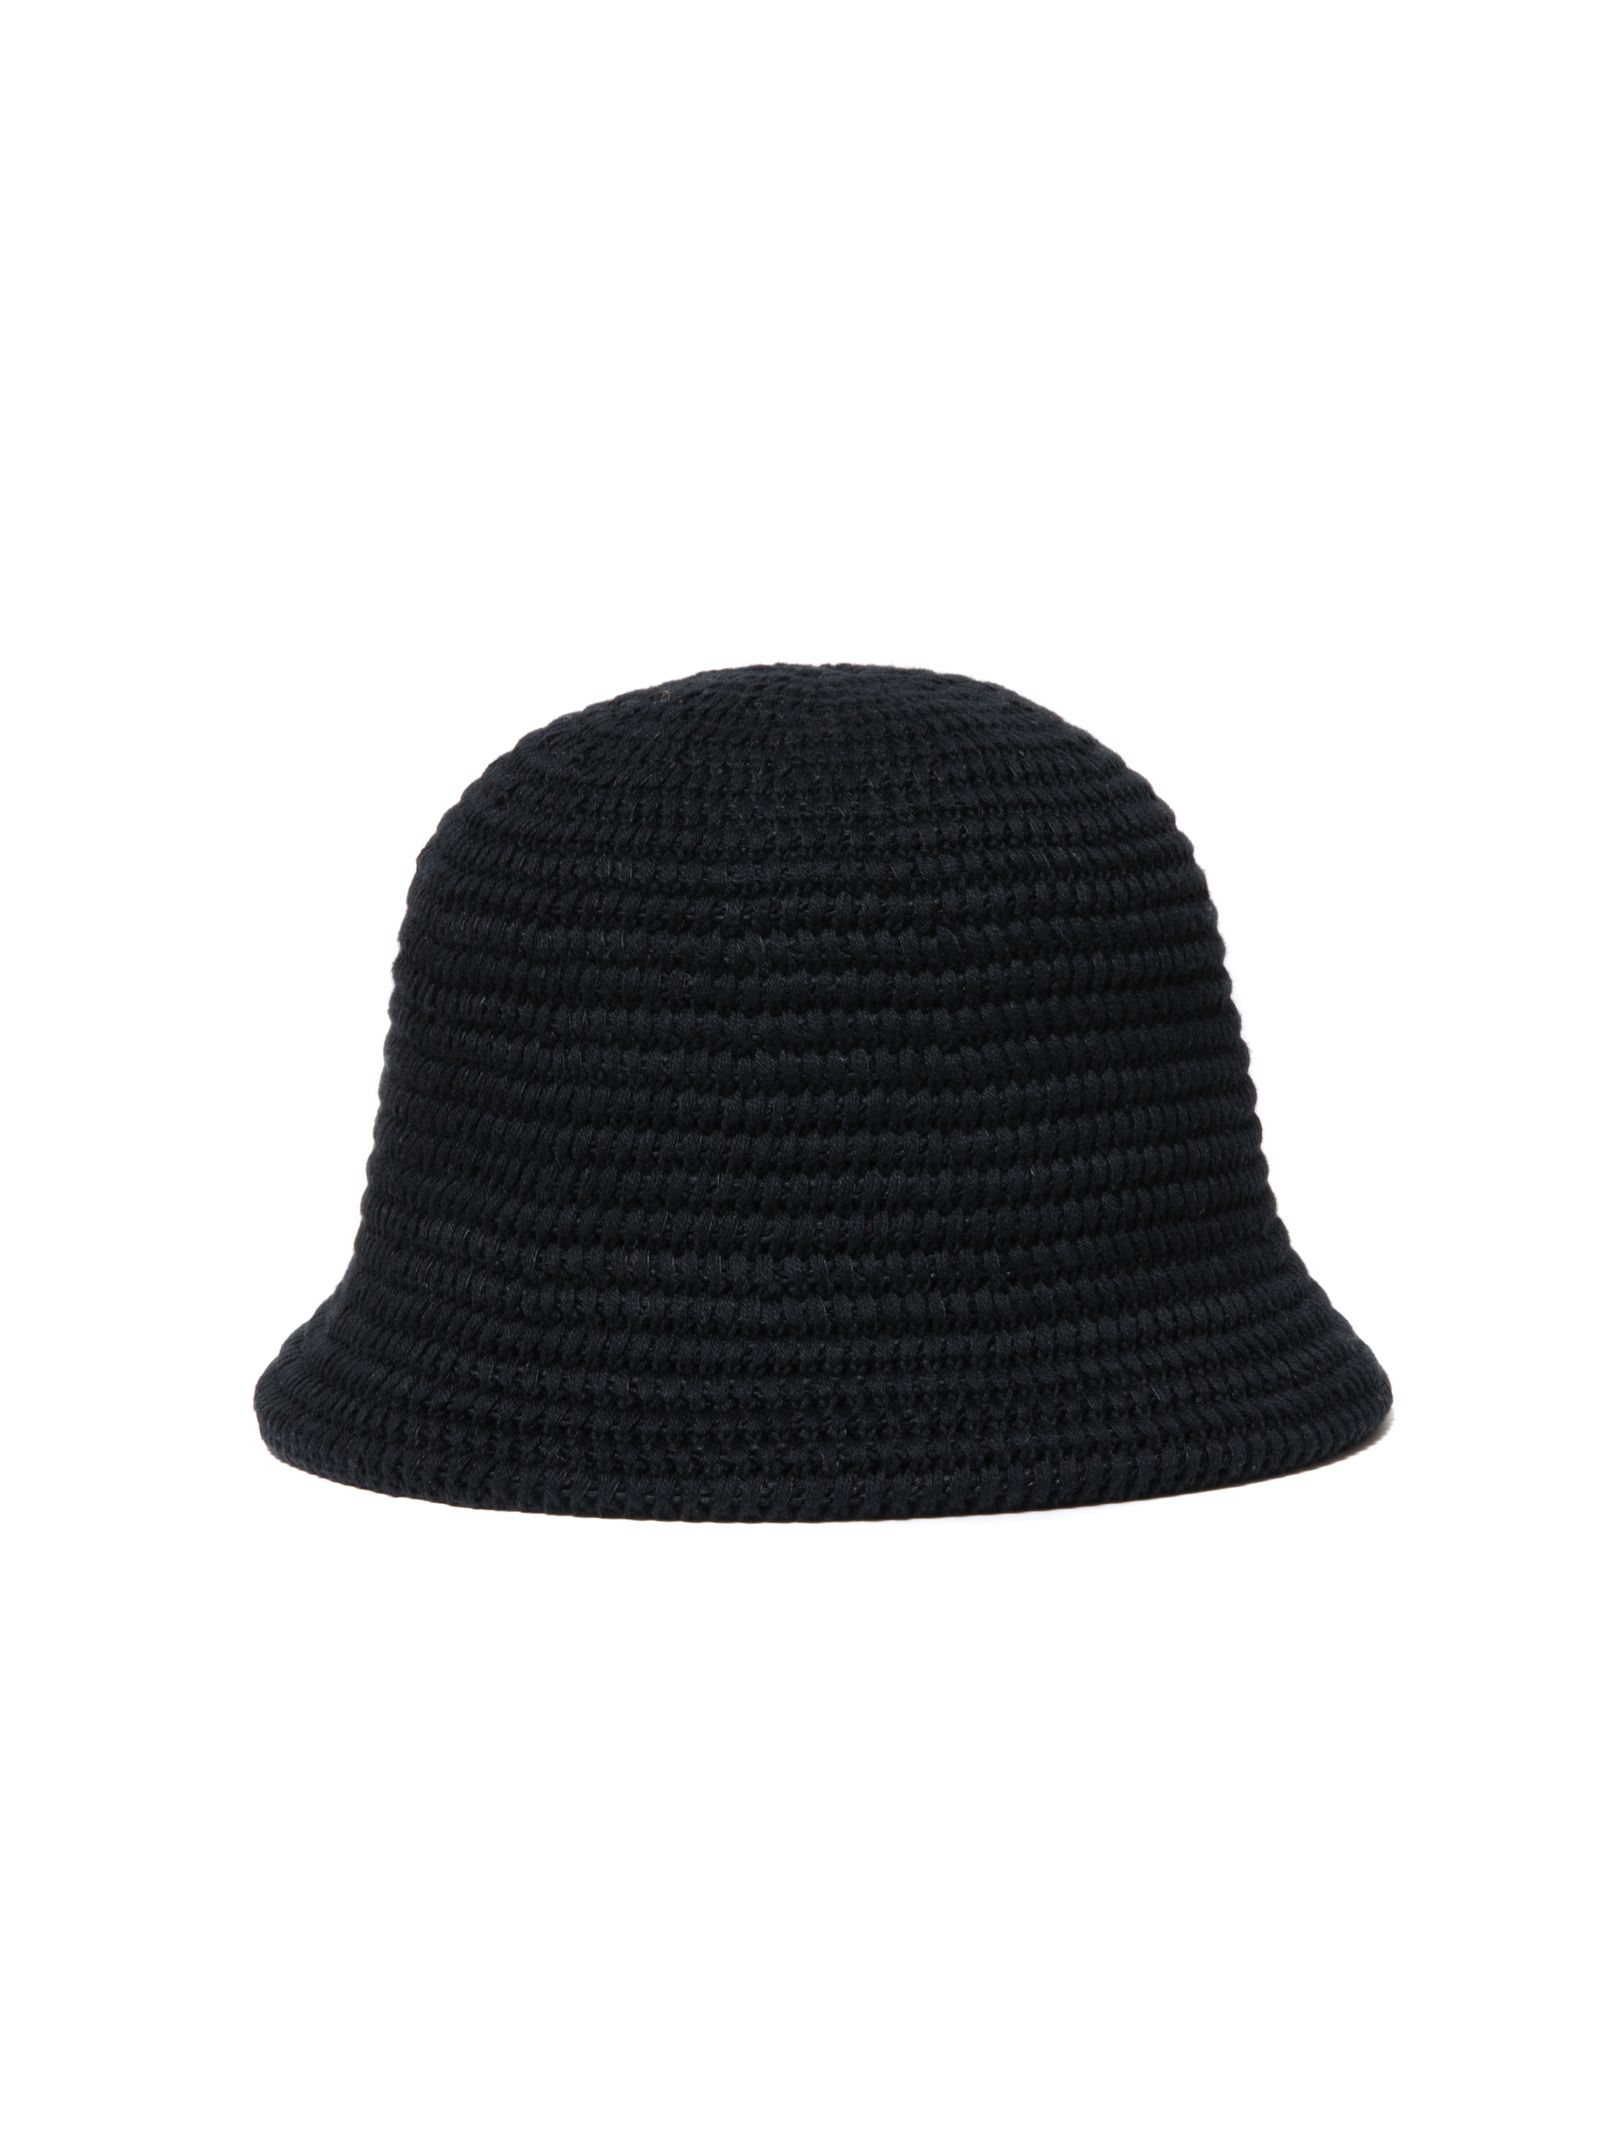 COOTIE PRODUCTIONS - Knit Crusher Hat / Black | Stripe Online Store